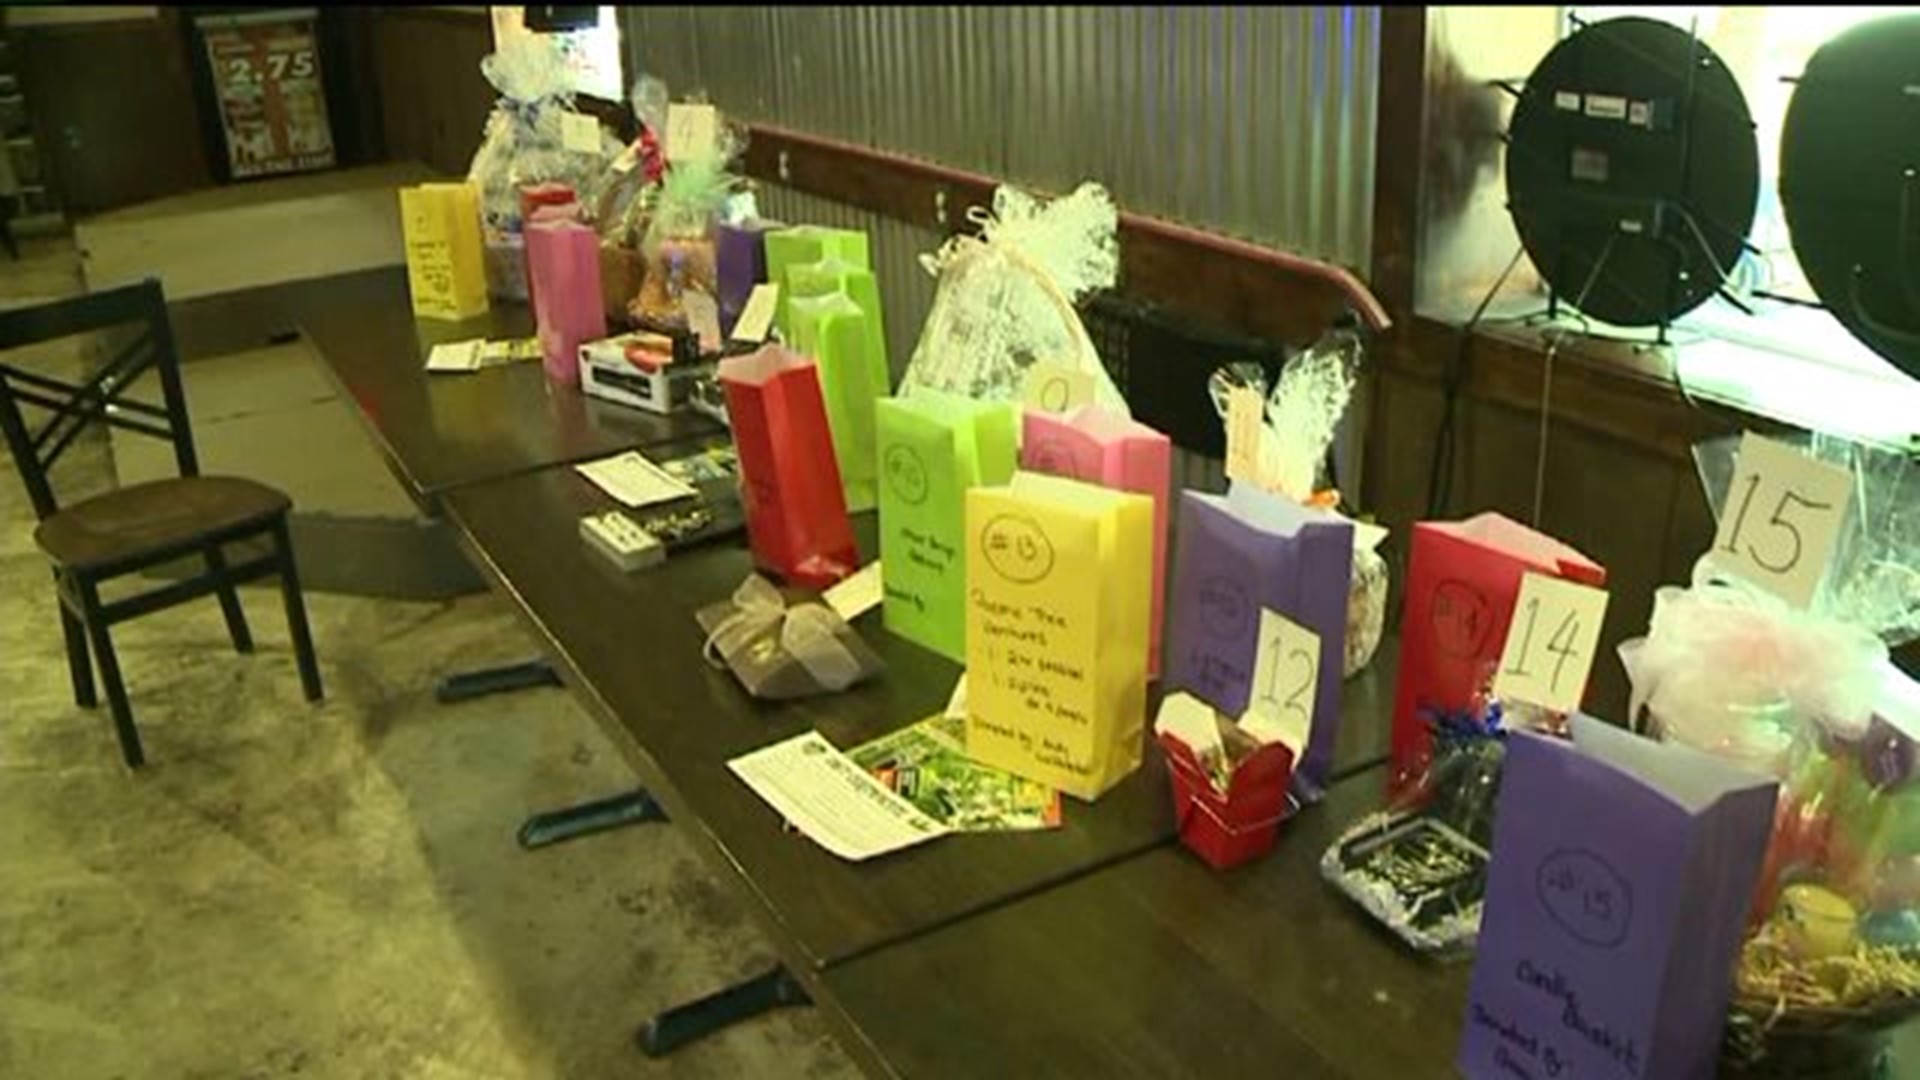 Restaurant Event Supports Cancer Victim's Family